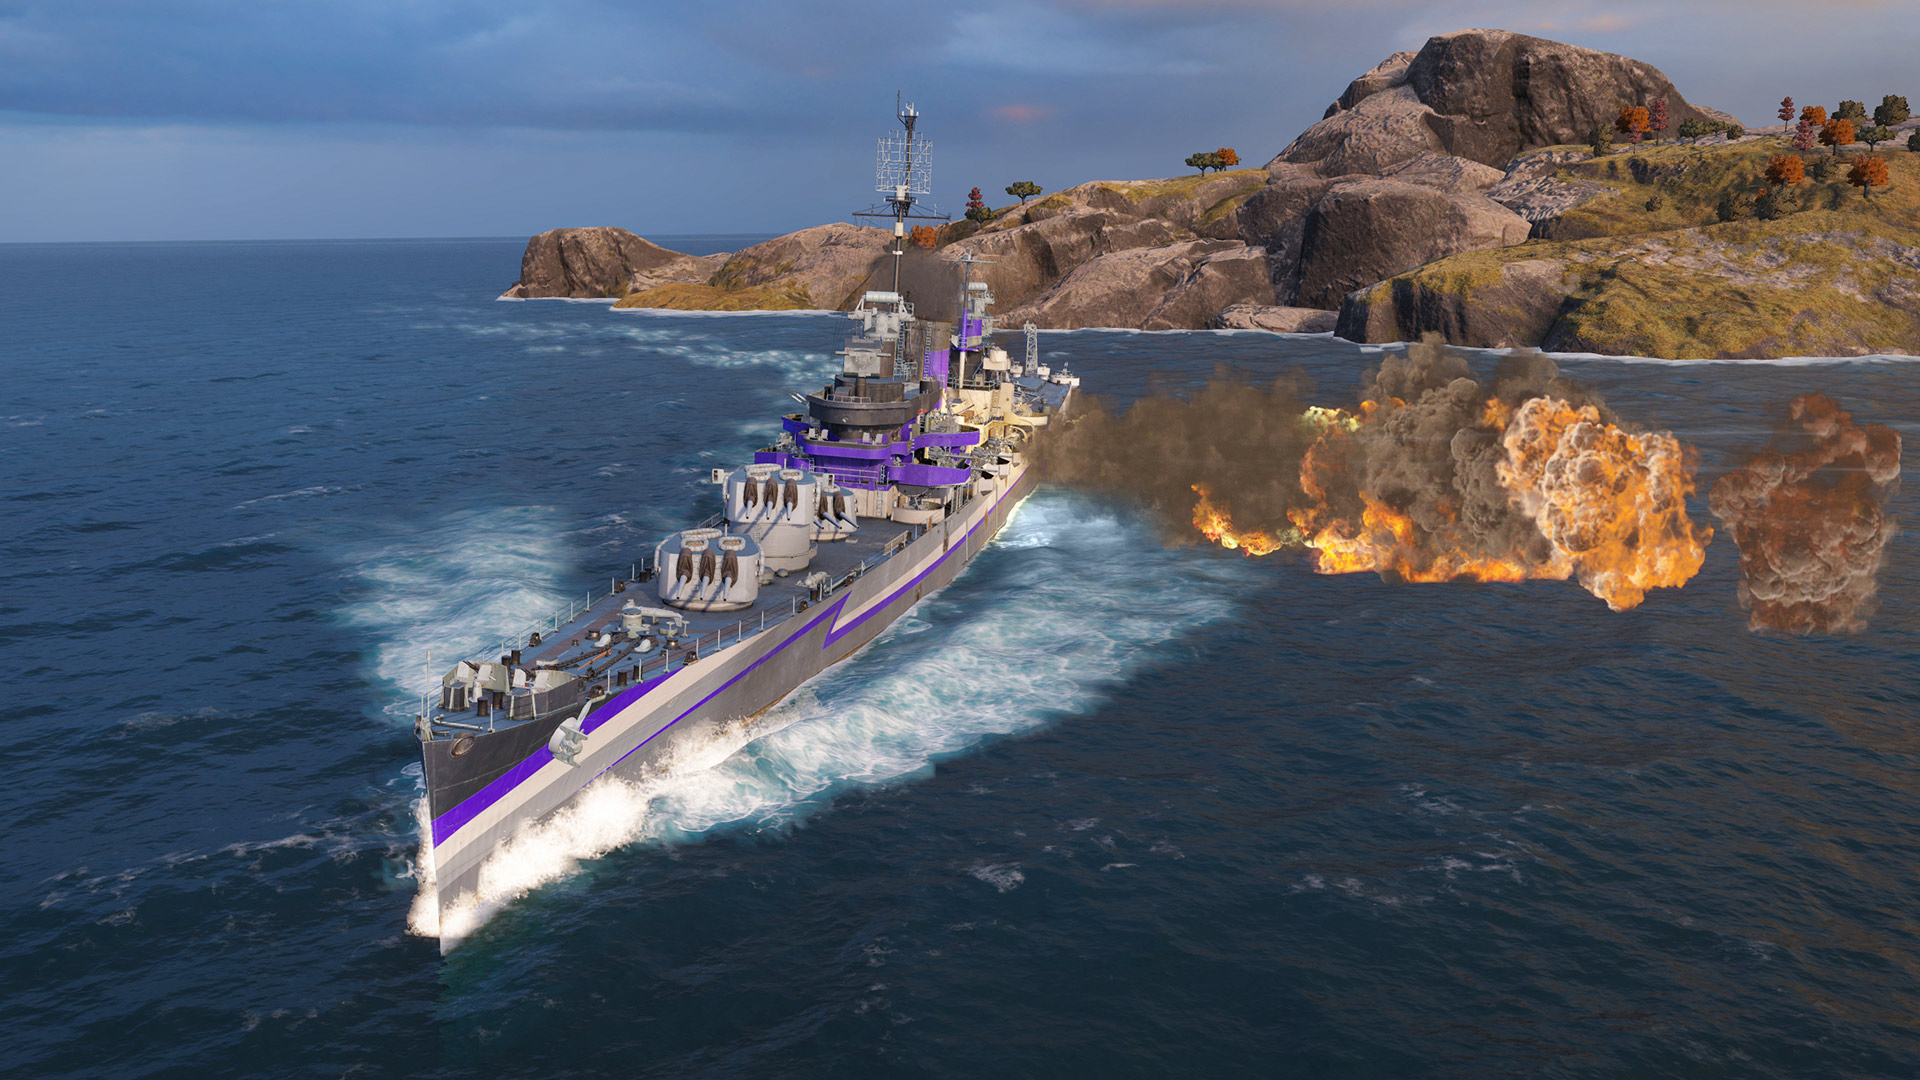 world of warships legends update ps4